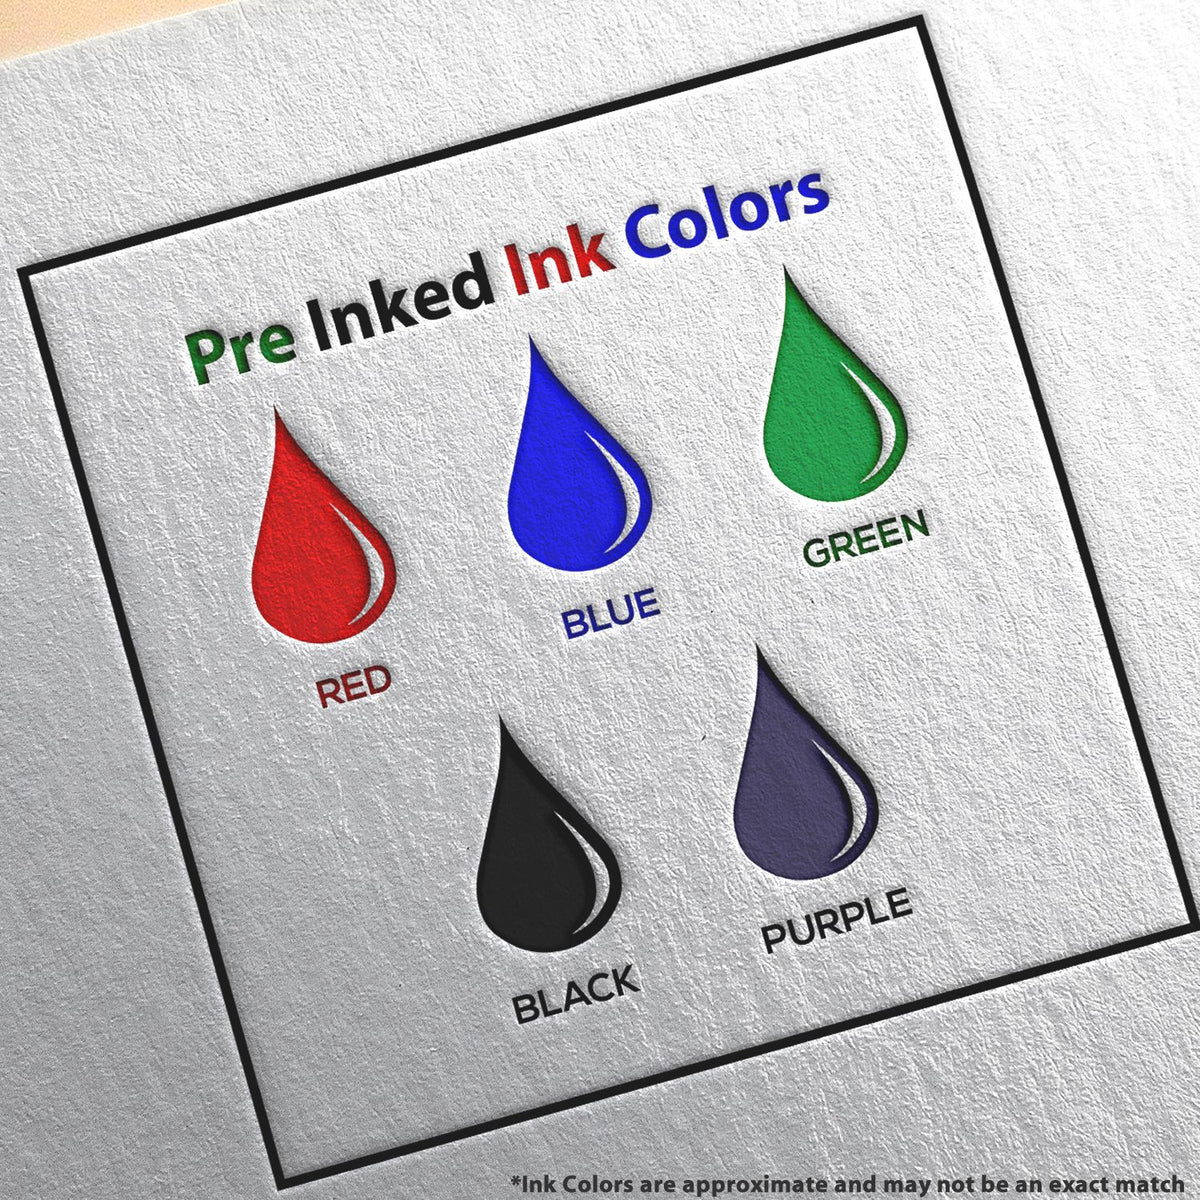 A picture showing the different ink colors or hues available for the Premium MaxLight Pre-Inked Rhode Is Landscape Architects Stamp product.